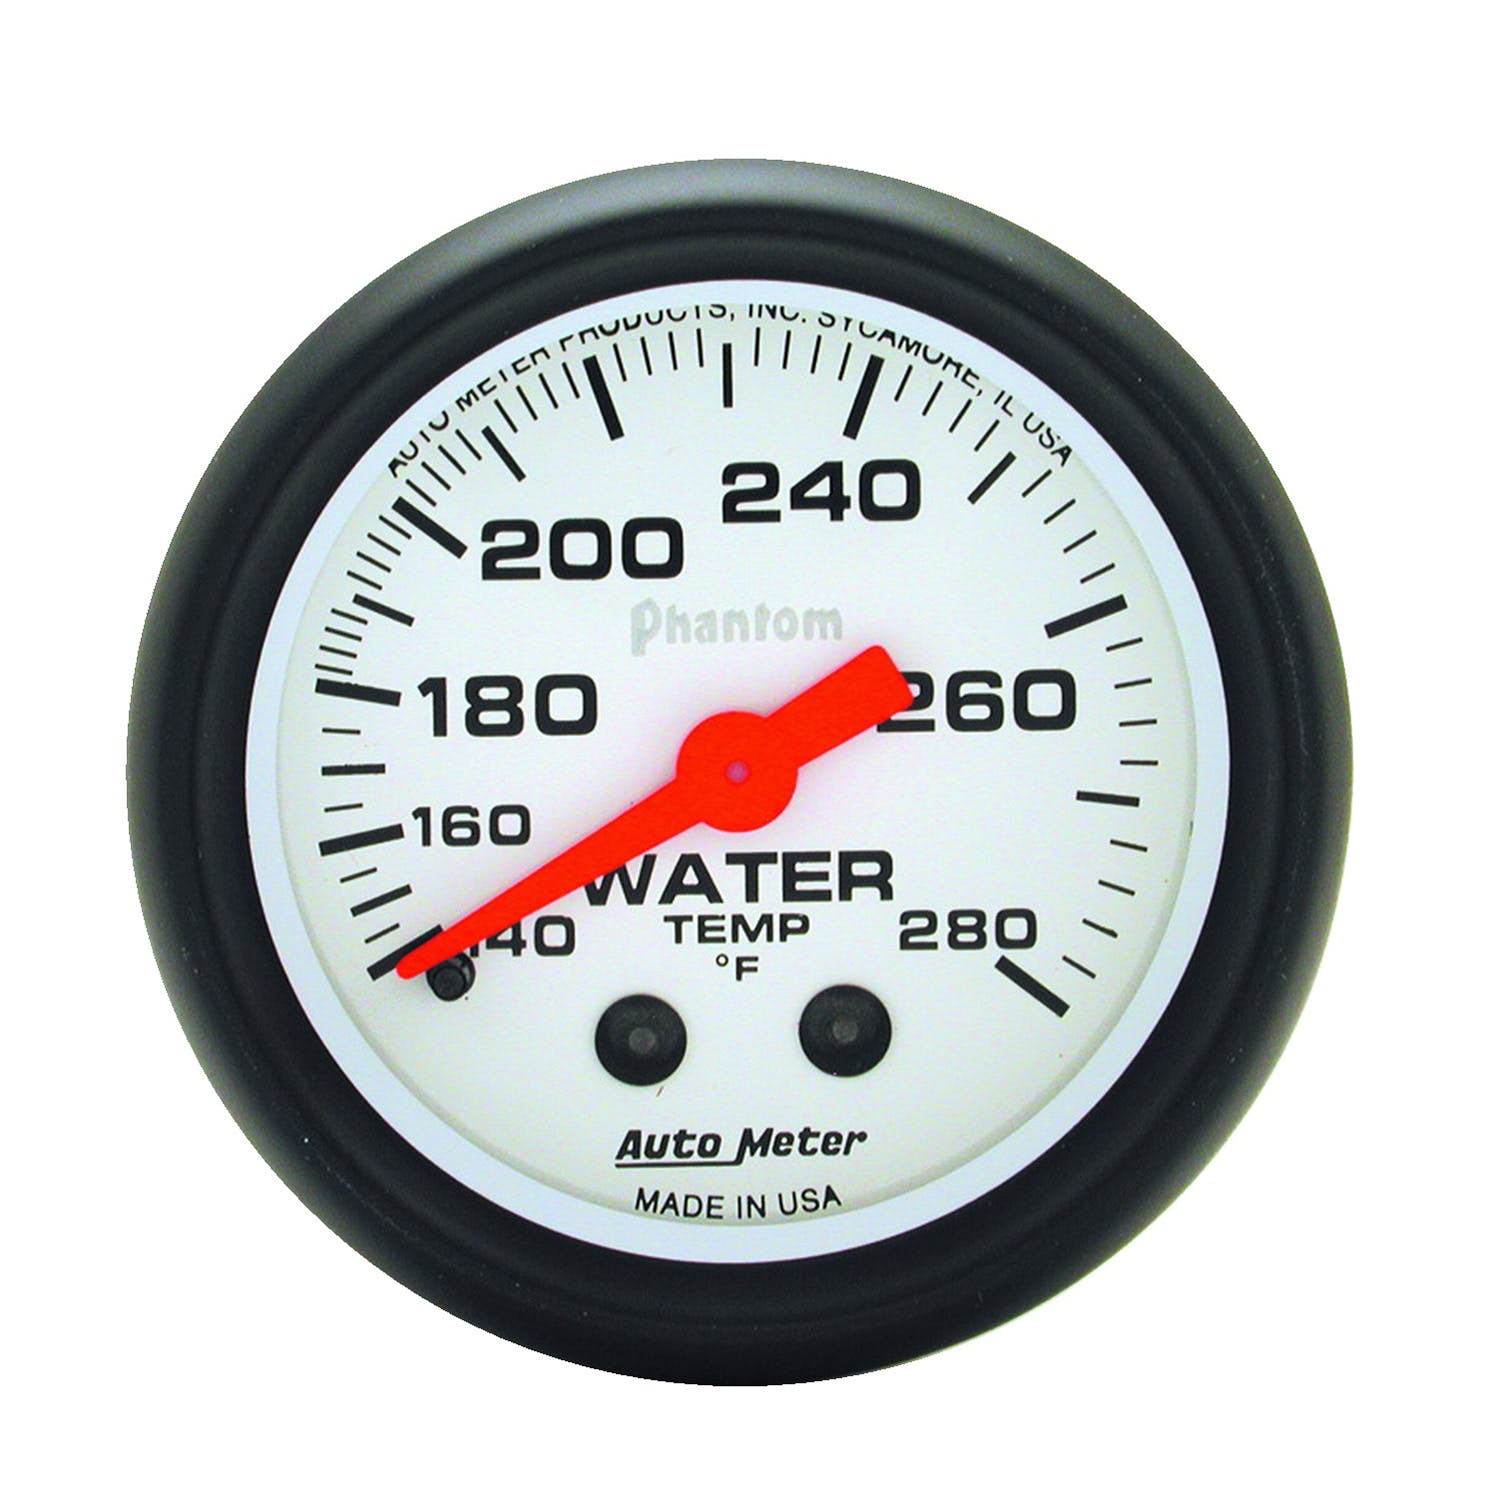 AutoMeter Products 5731 Water Temp 140-280 F